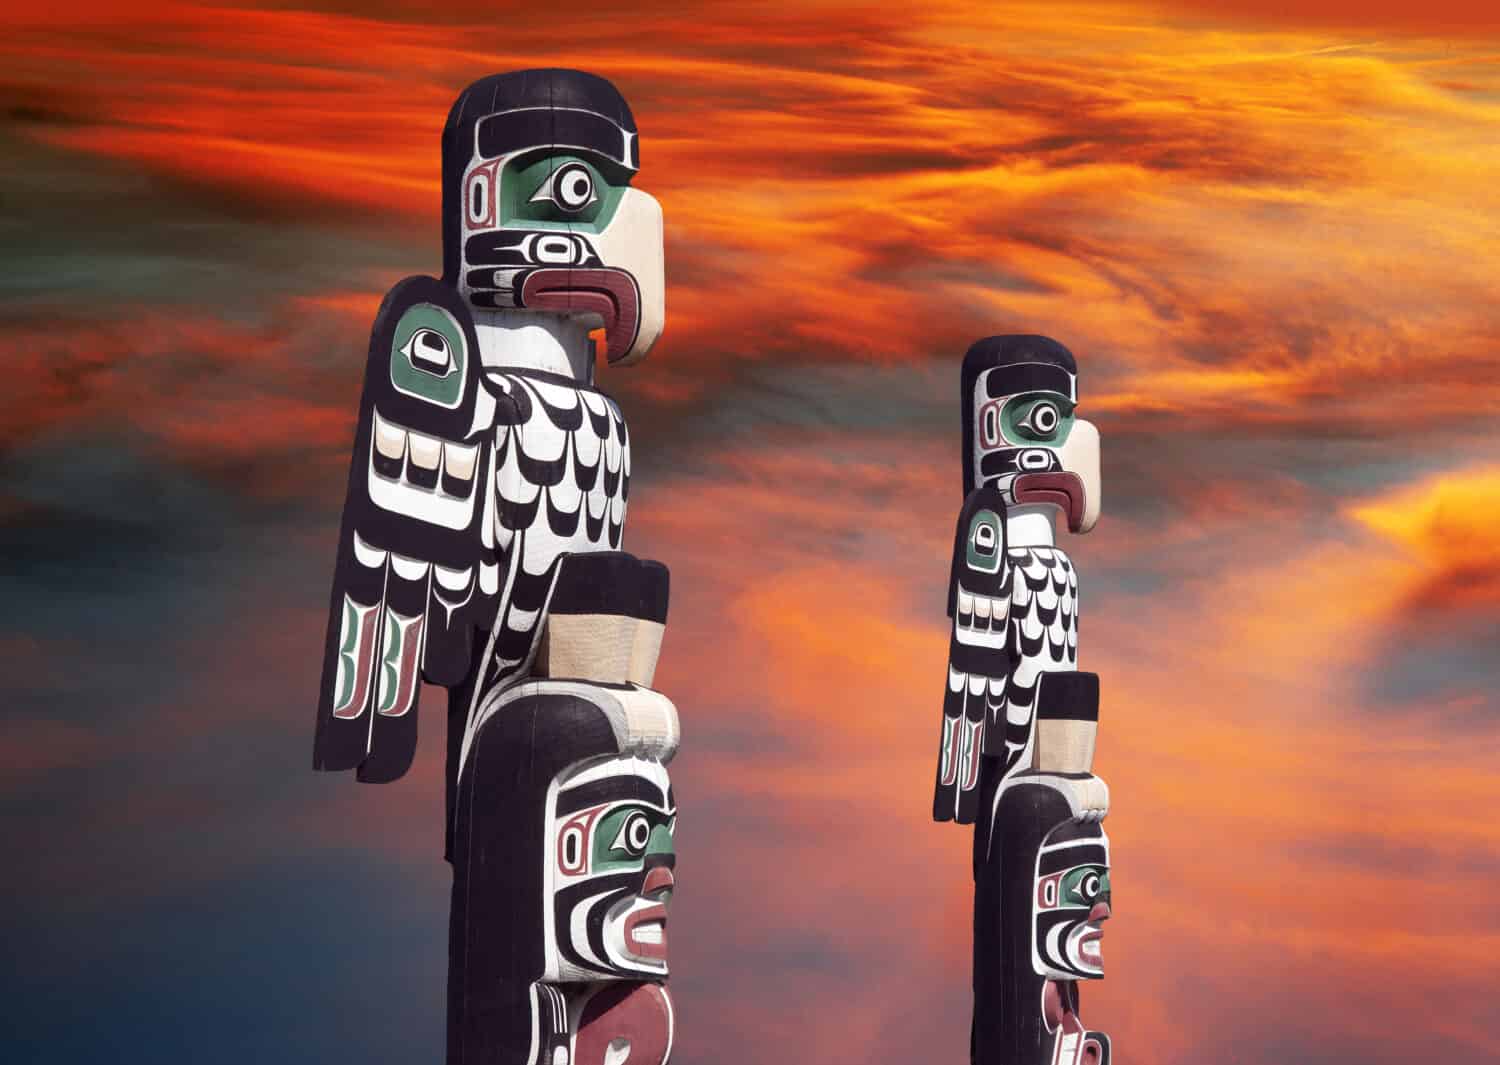 Totems with apocalyptic clouds in Courtenay, Vancouver Island, Canada